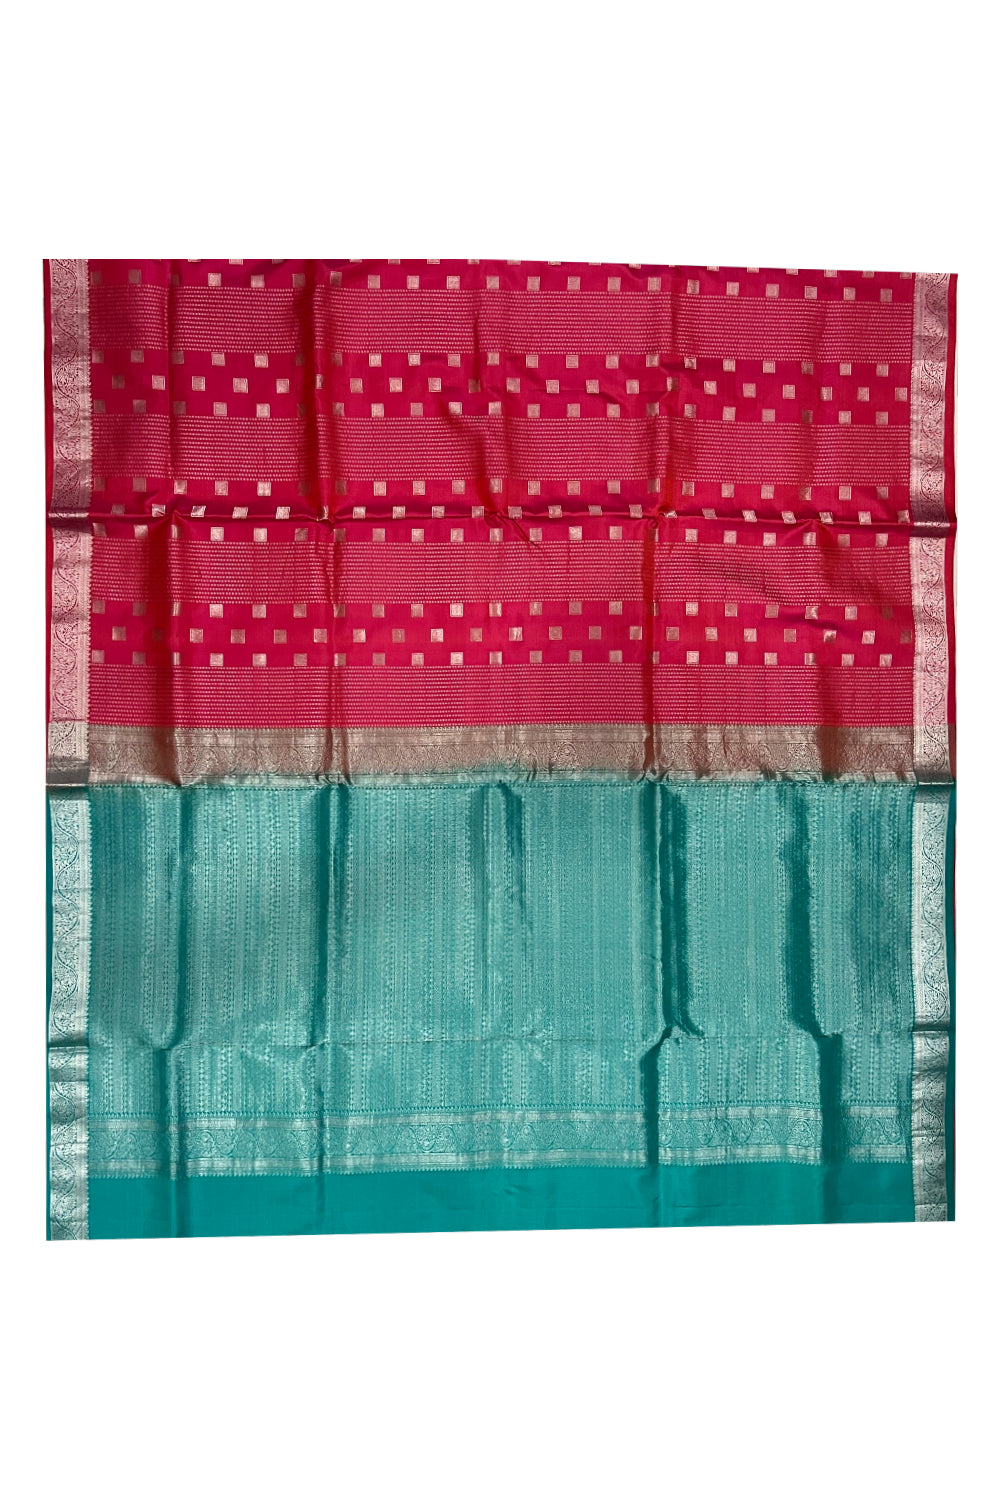 Southloom Handloom Pure Silk Kanchipuram Saree with Red Body and Green Blouse Piece